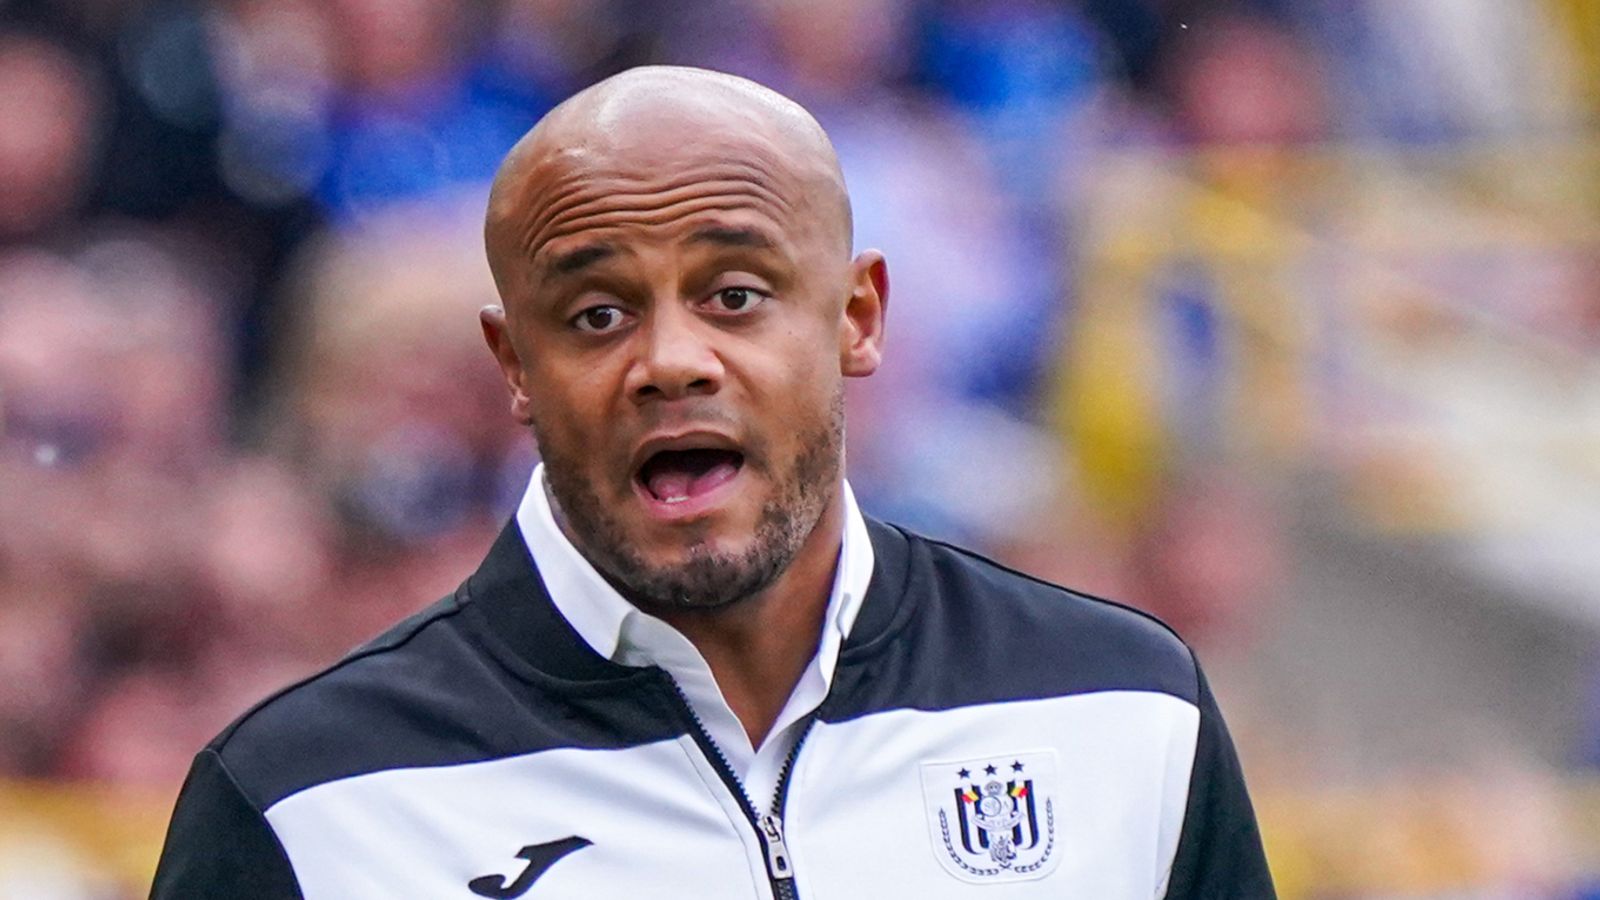 Vincent Kompany leaves Anderlecht and is on Burnley shortlist to succeed Sean Dyche as Clarets boss following relegation